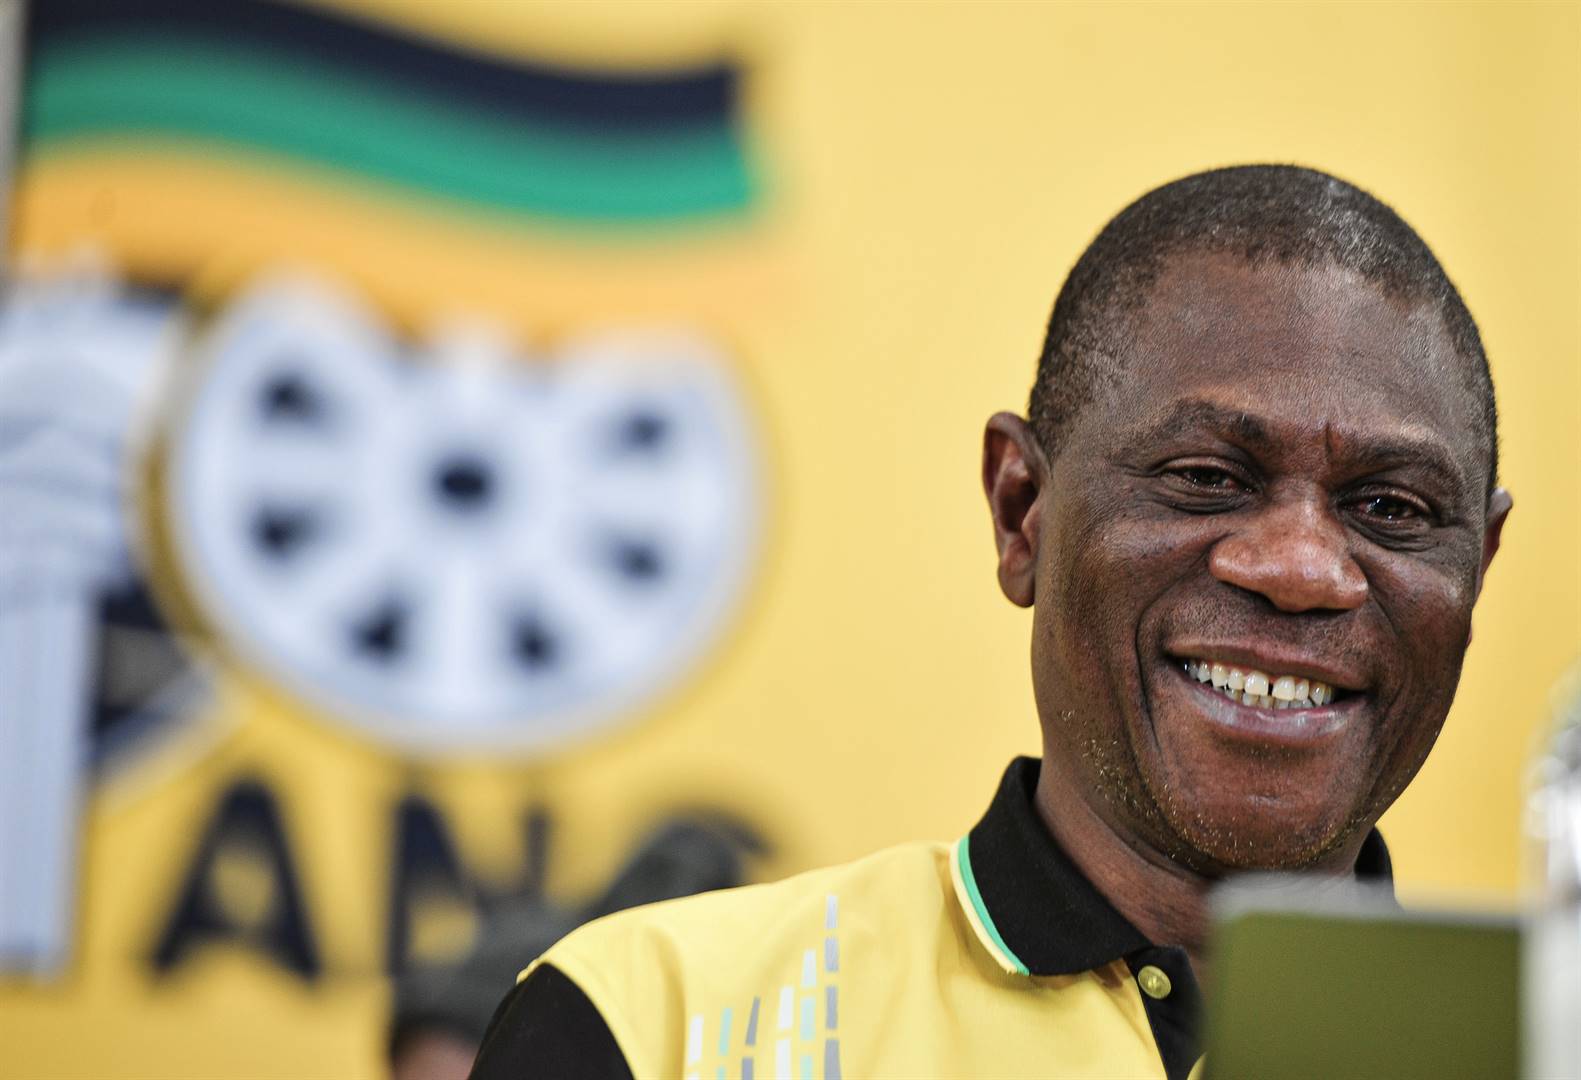 Paul Mashatile has emerged as a strong contender for the position of ANC deputy president.